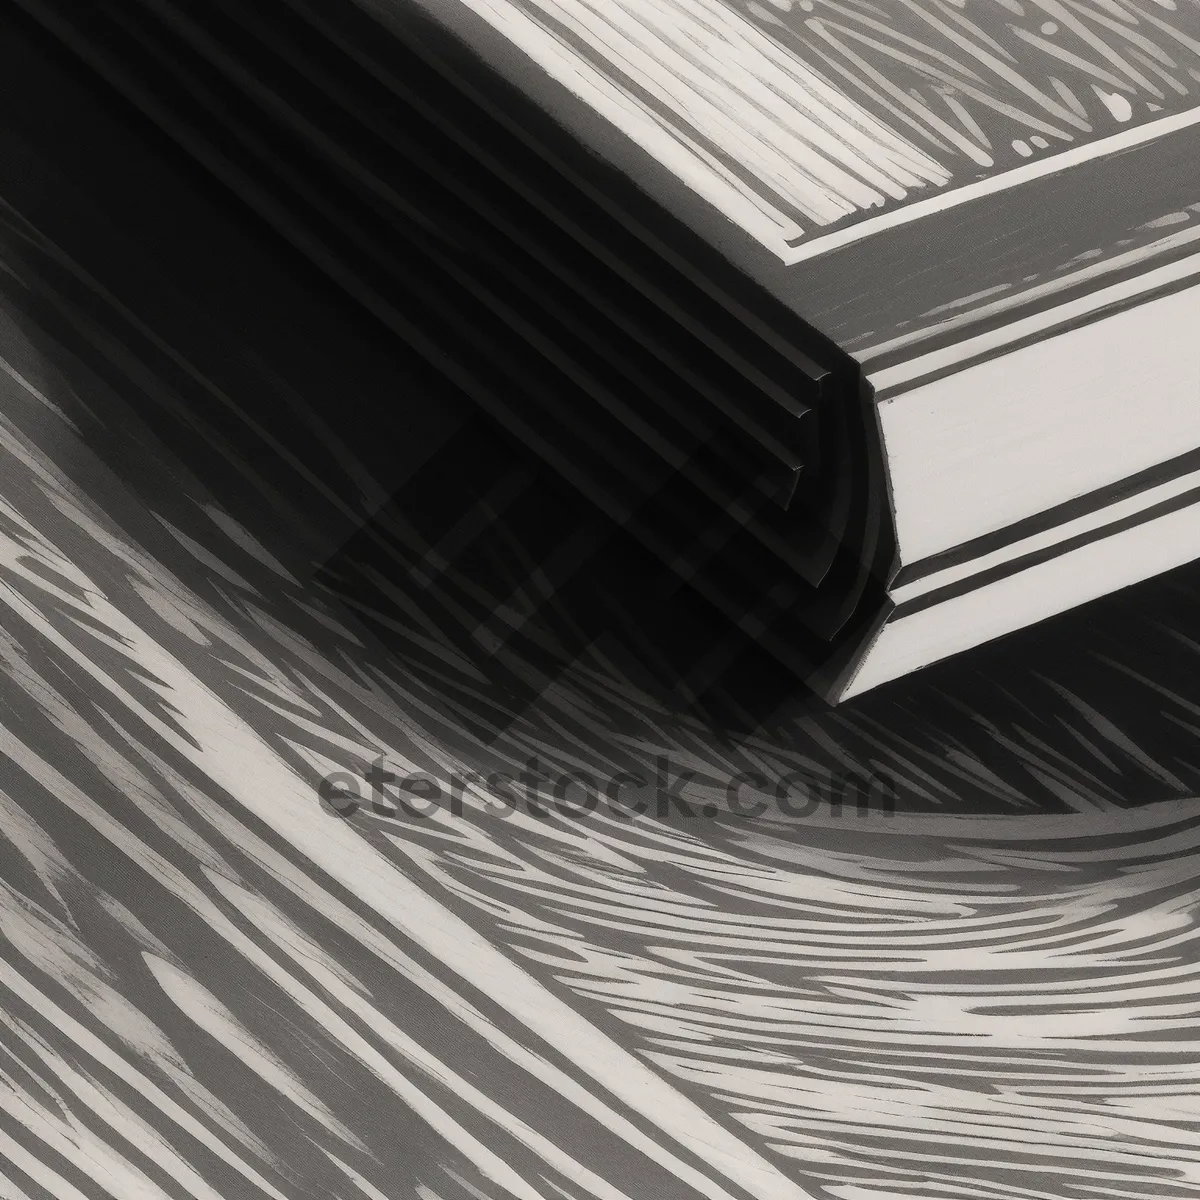 Picture of Journal Art: Digital Graphic with Flowing Fractal Lines